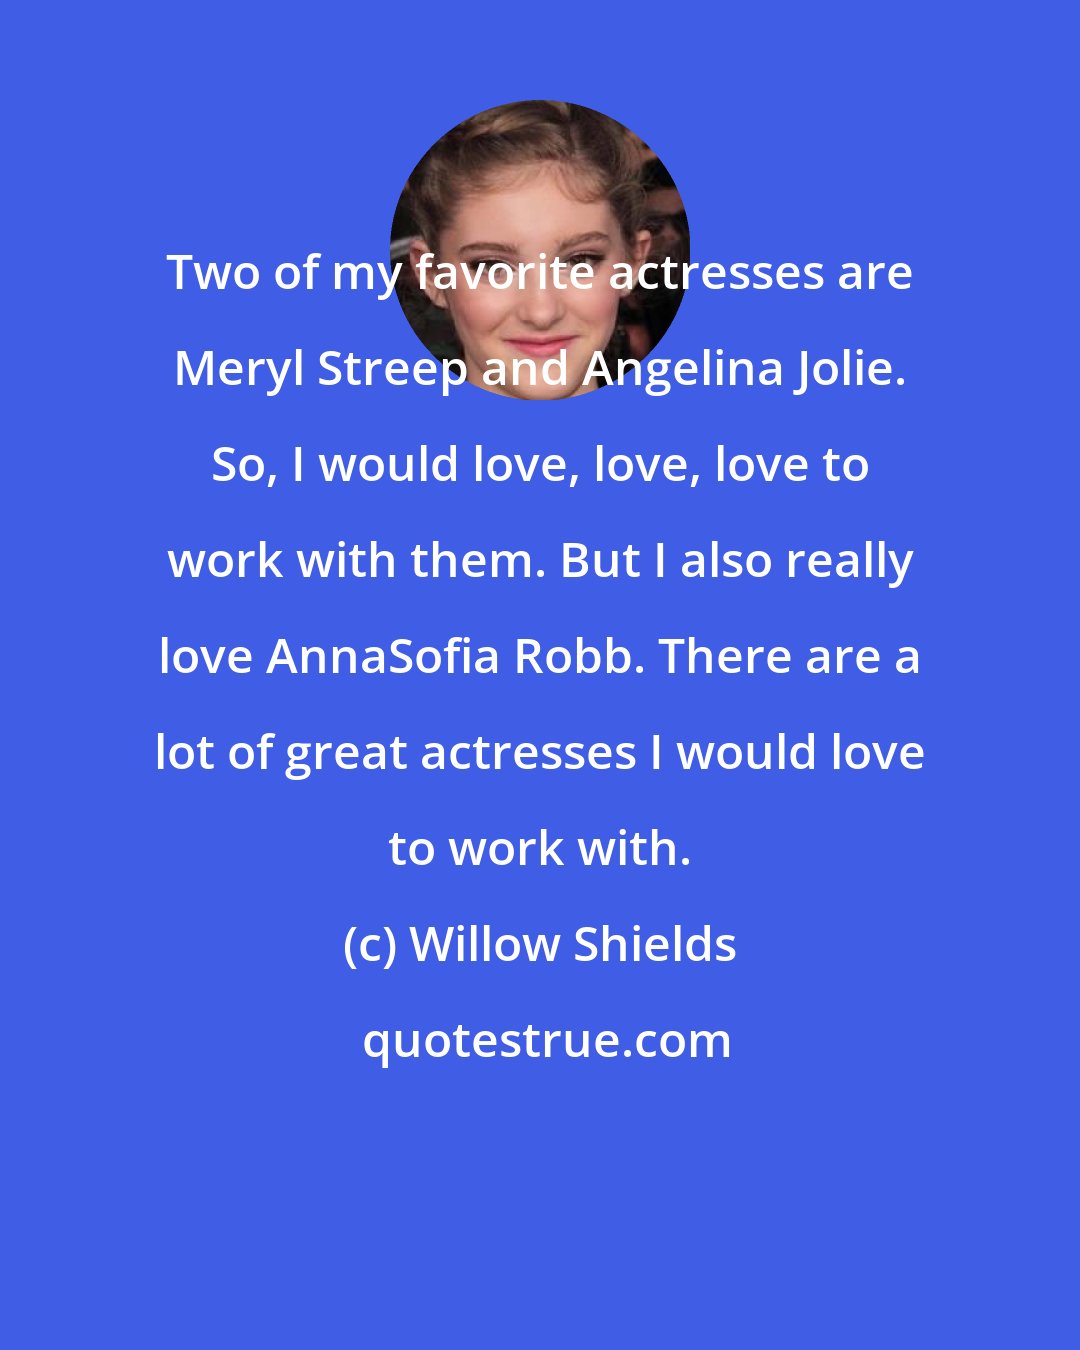 Willow Shields: Two of my favorite actresses are Meryl Streep and Angelina Jolie. So, I would love, love, love to work with them. But I also really love AnnaSofia Robb. There are a lot of great actresses I would love to work with.